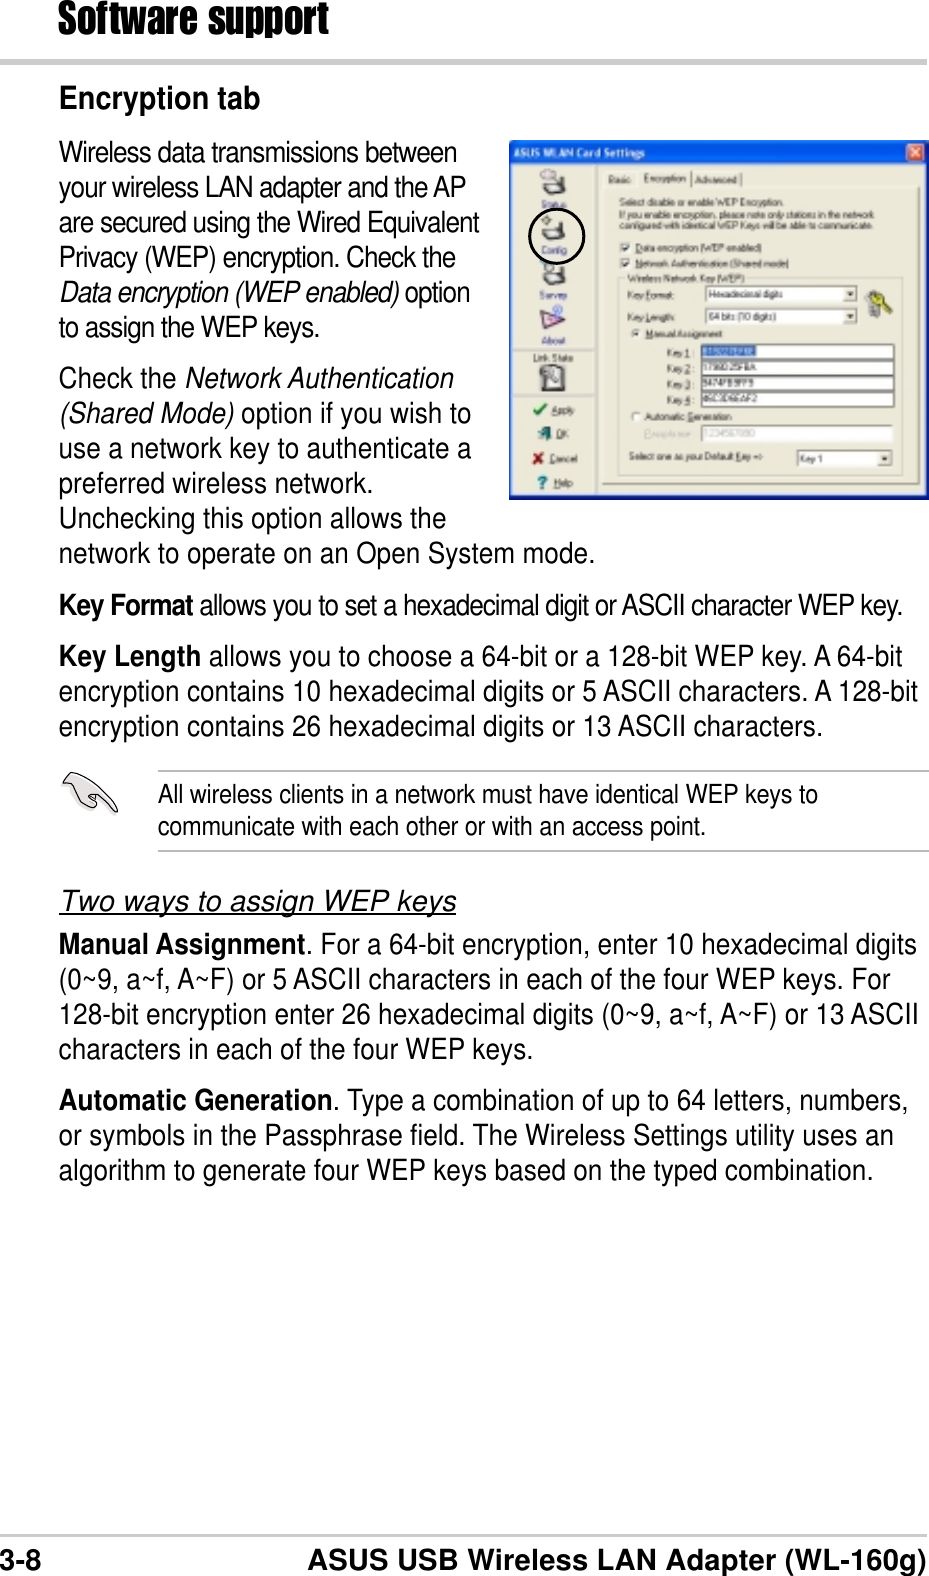 3-8 ASUS USB Wireless LAN Adapter (WL-160g)Software supportEncryption tabWireless data transmissions betweenyour wireless LAN adapter and the APare secured using the Wired EquivalentPrivacy (WEP) encryption. Check theData encryption (WEP enabled) optionto assign the WEP keys.Check the Network Authentication(Shared Mode) option if you wish touse a network key to authenticate apreferred wireless network.Unchecking this option allows thenetwork to operate on an Open System mode.Key Format allows you to set a hexadecimal digit or ASCII character WEP key.Key Length allows you to choose a 64-bit or a 128-bit WEP key. A 64-bitencryption contains 10 hexadecimal digits or 5 ASCII characters. A 128-bitencryption contains 26 hexadecimal digits or 13 ASCII characters.All wireless clients in a network must have identical WEP keys tocommunicate with each other or with an access point.Two ways to assign WEP keysManual Assignment. For a 64-bit encryption, enter 10 hexadecimal digits(0~9, a~f, A~F) or 5 ASCII characters in each of the four WEP keys. For128-bit encryption enter 26 hexadecimal digits (0~9, a~f, A~F) or 13 ASCIIcharacters in each of the four WEP keys.Automatic Generation. Type a combination of up to 64 letters, numbers,or symbols in the Passphrase field. The Wireless Settings utility uses analgorithm to generate four WEP keys based on the typed combination.